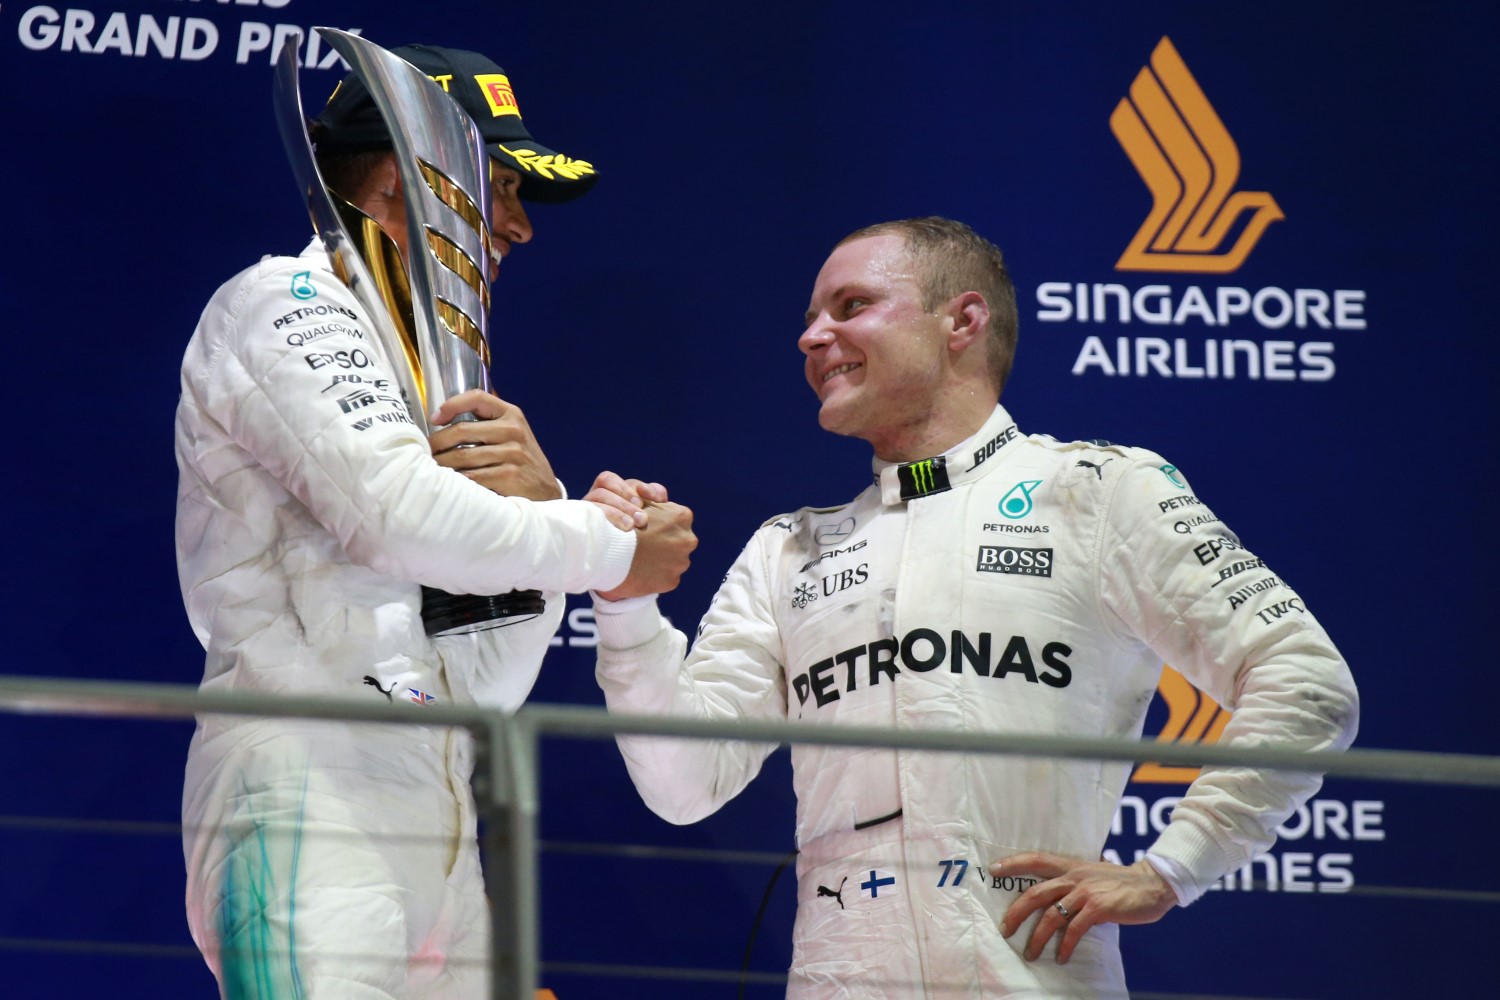 Another double podium for Mercedes